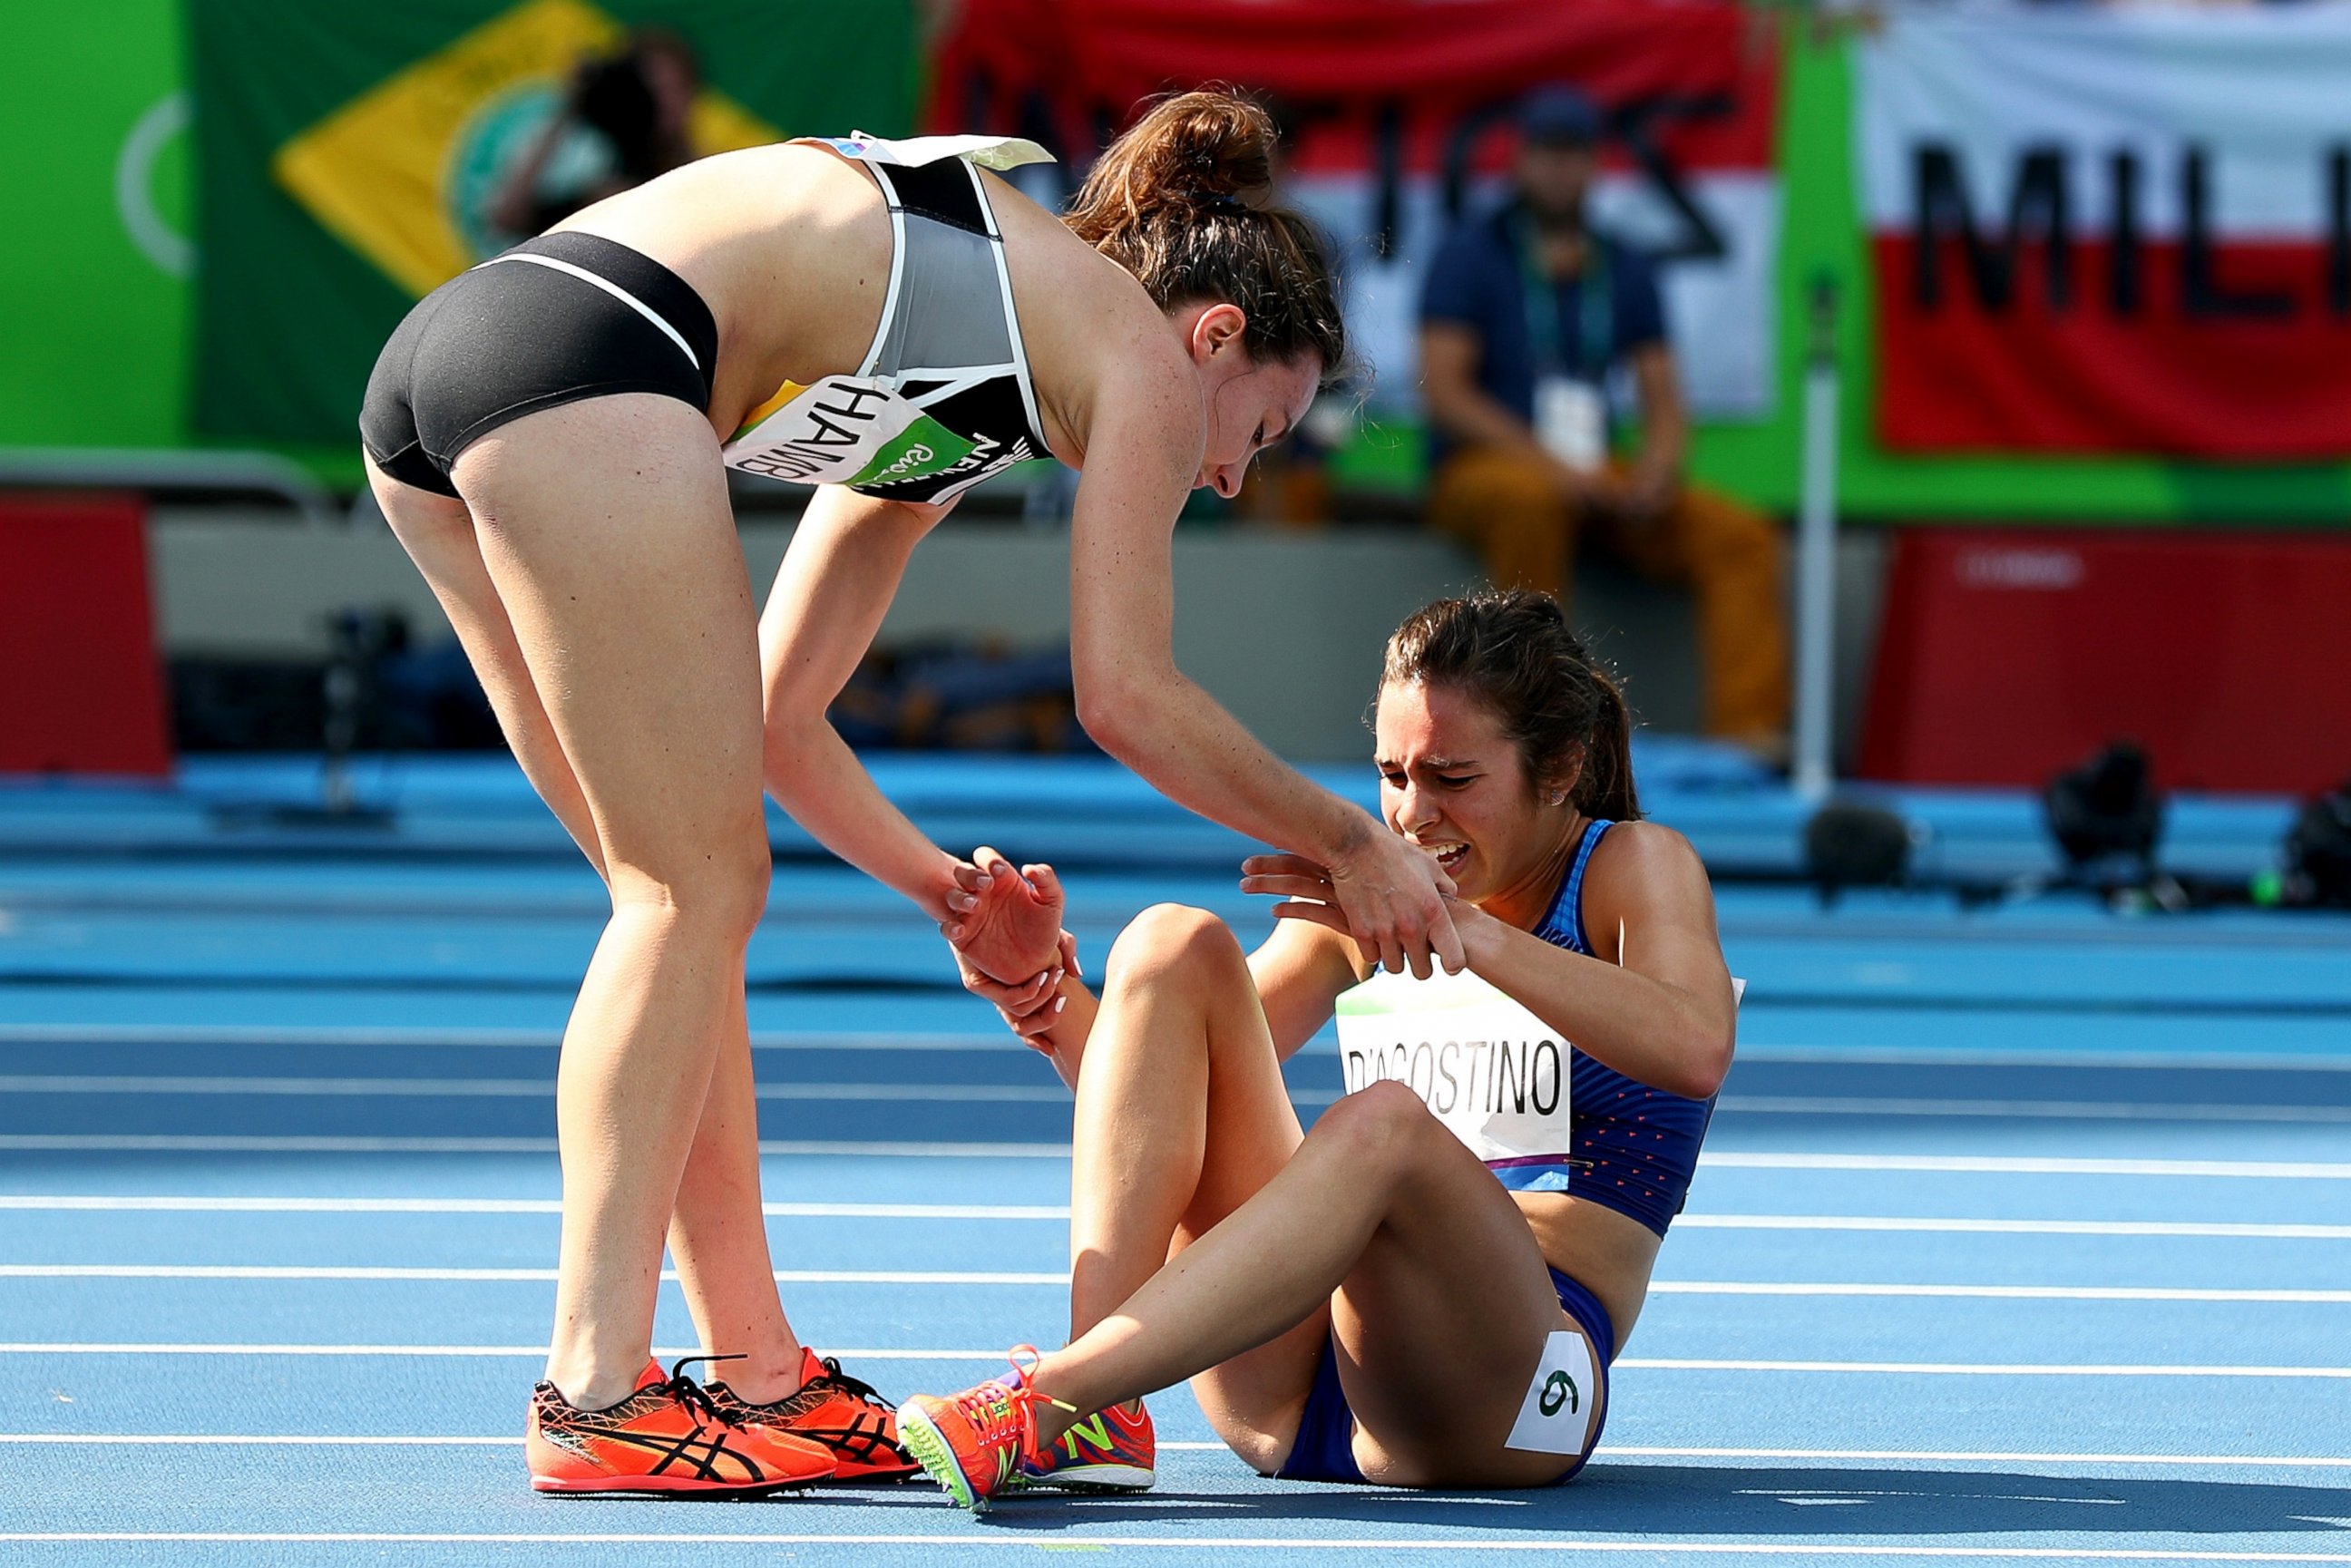 PHOTO: Abbey D'Agostino of the United States (R) is assisted by Nikki Hamblin of New Zealand after a collision during the Women's 5000m Round 1 - Heat 2 on Day 11 of the Rio 2016 Olympic Games at the Olympic Stadium, Aug. 16, 2016, in Rio de Janeiro.